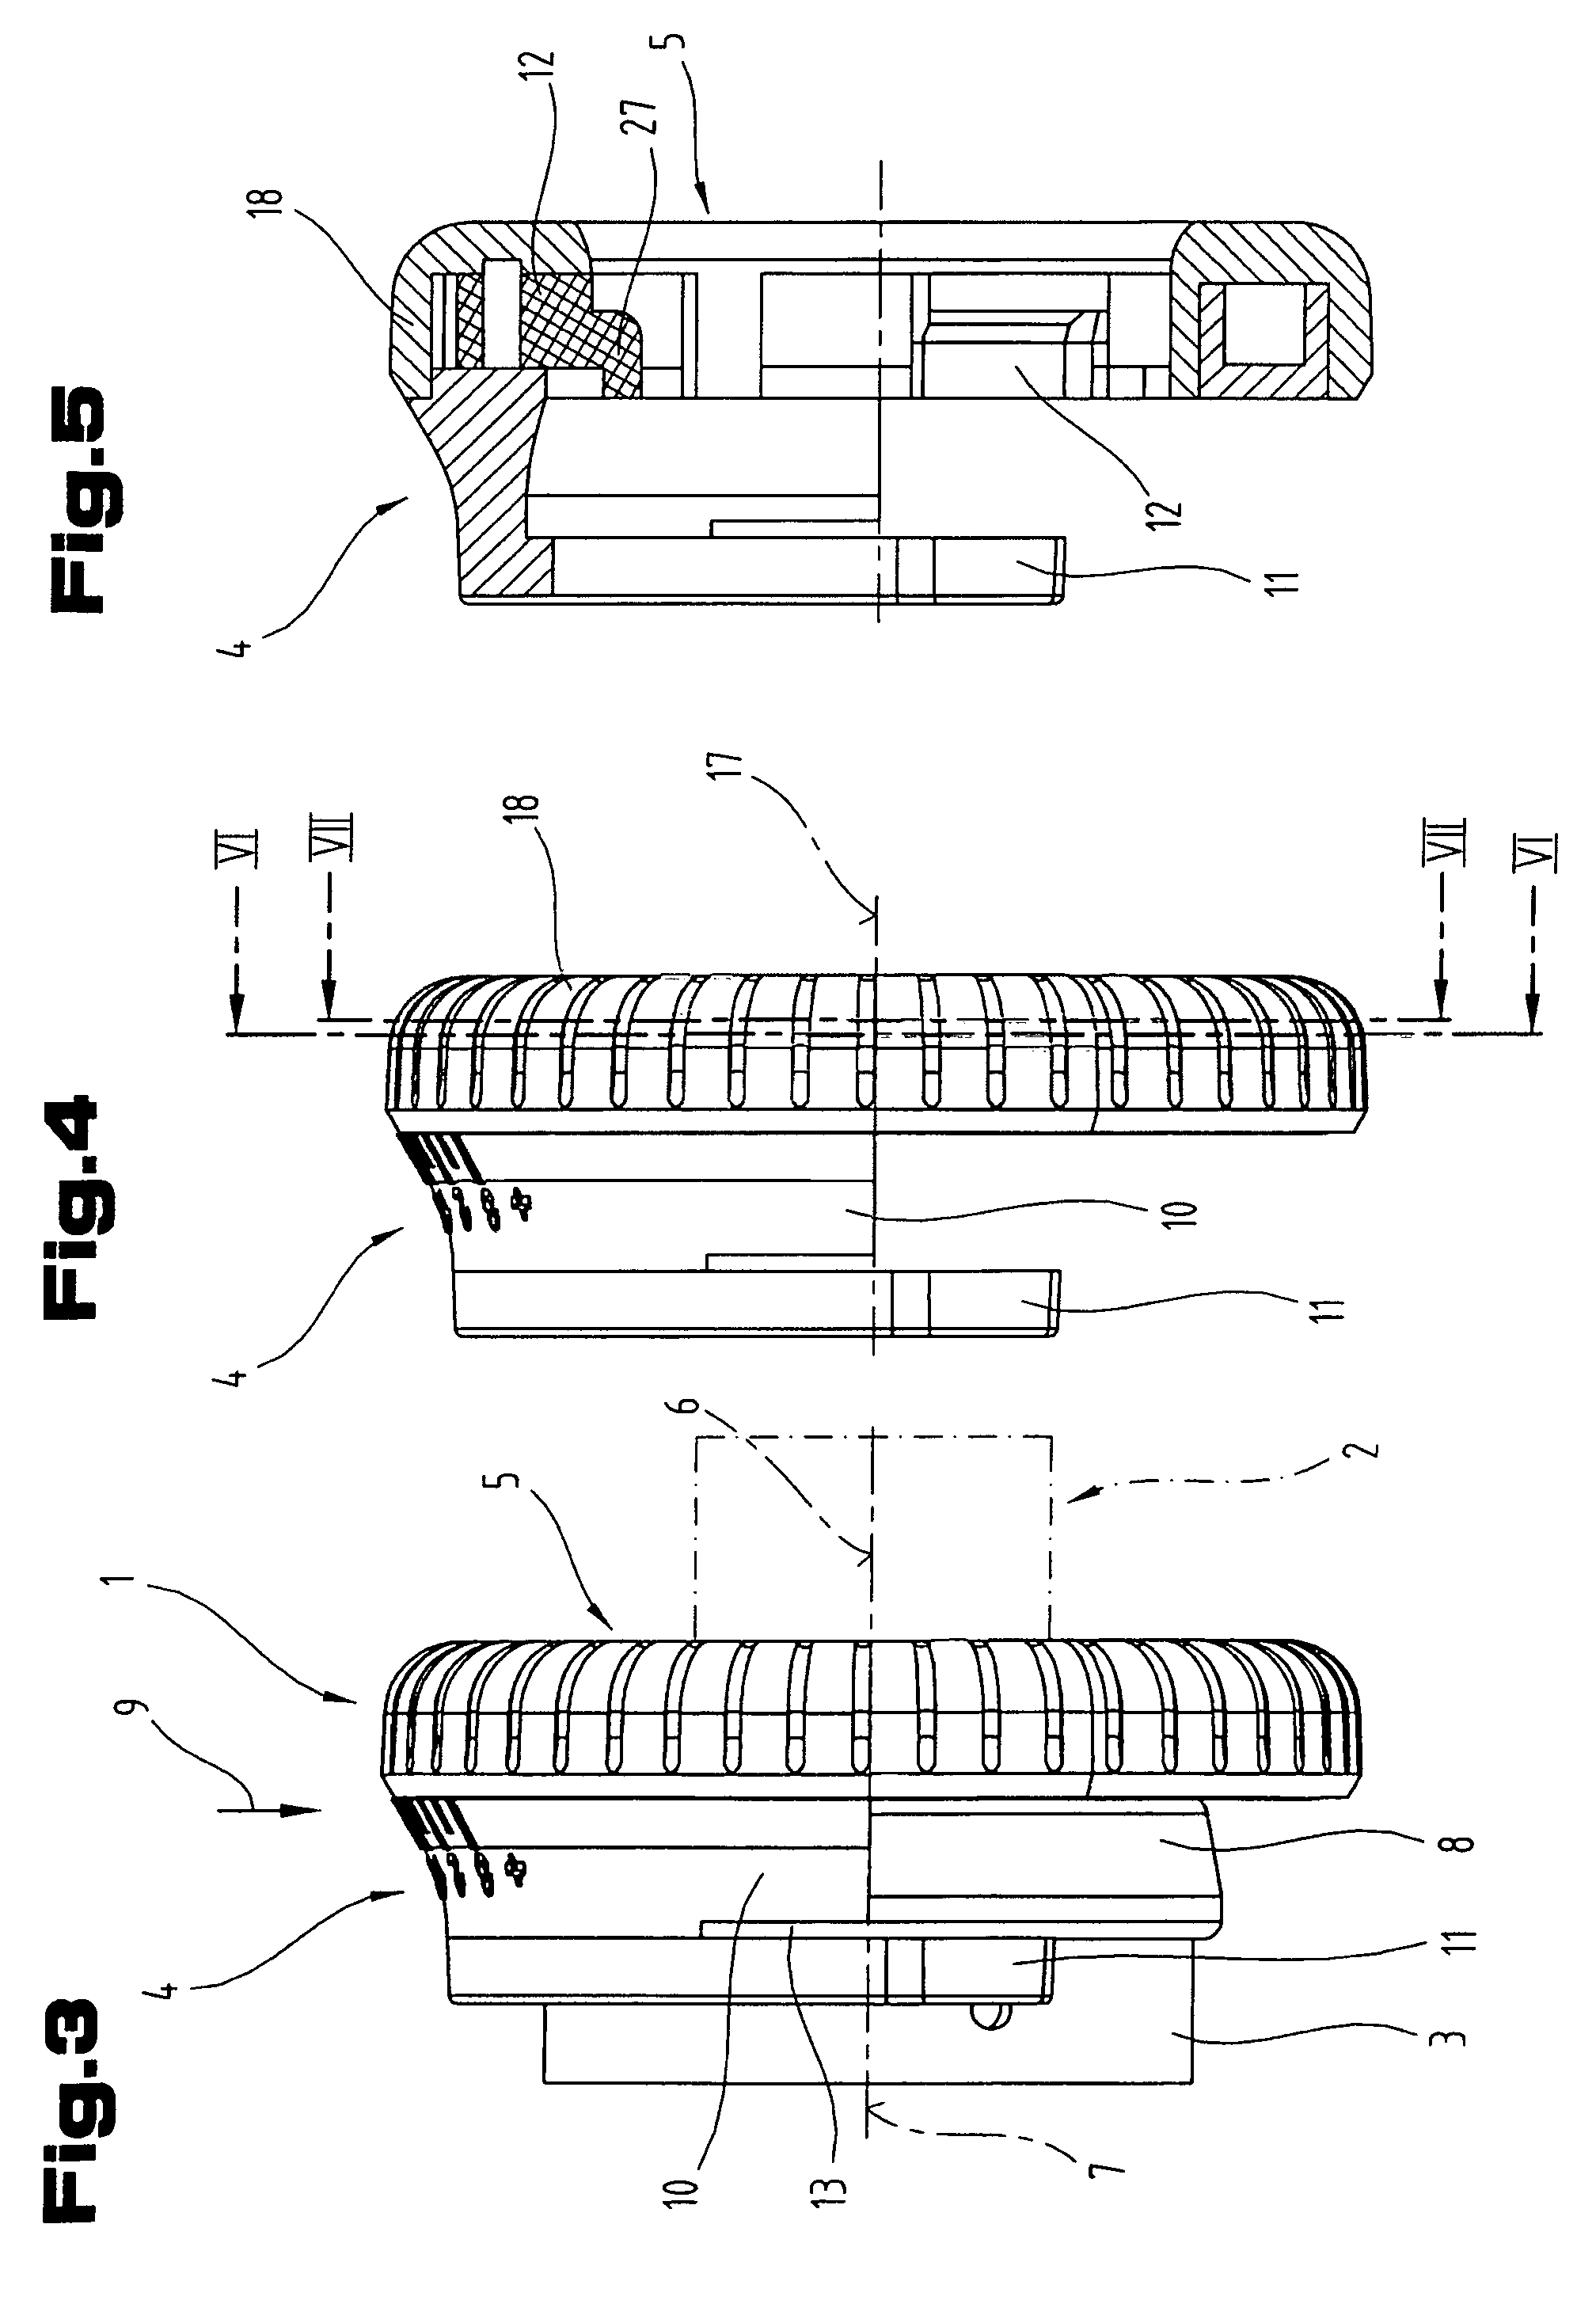 Adapter for connecting an optical recording device to an observation device